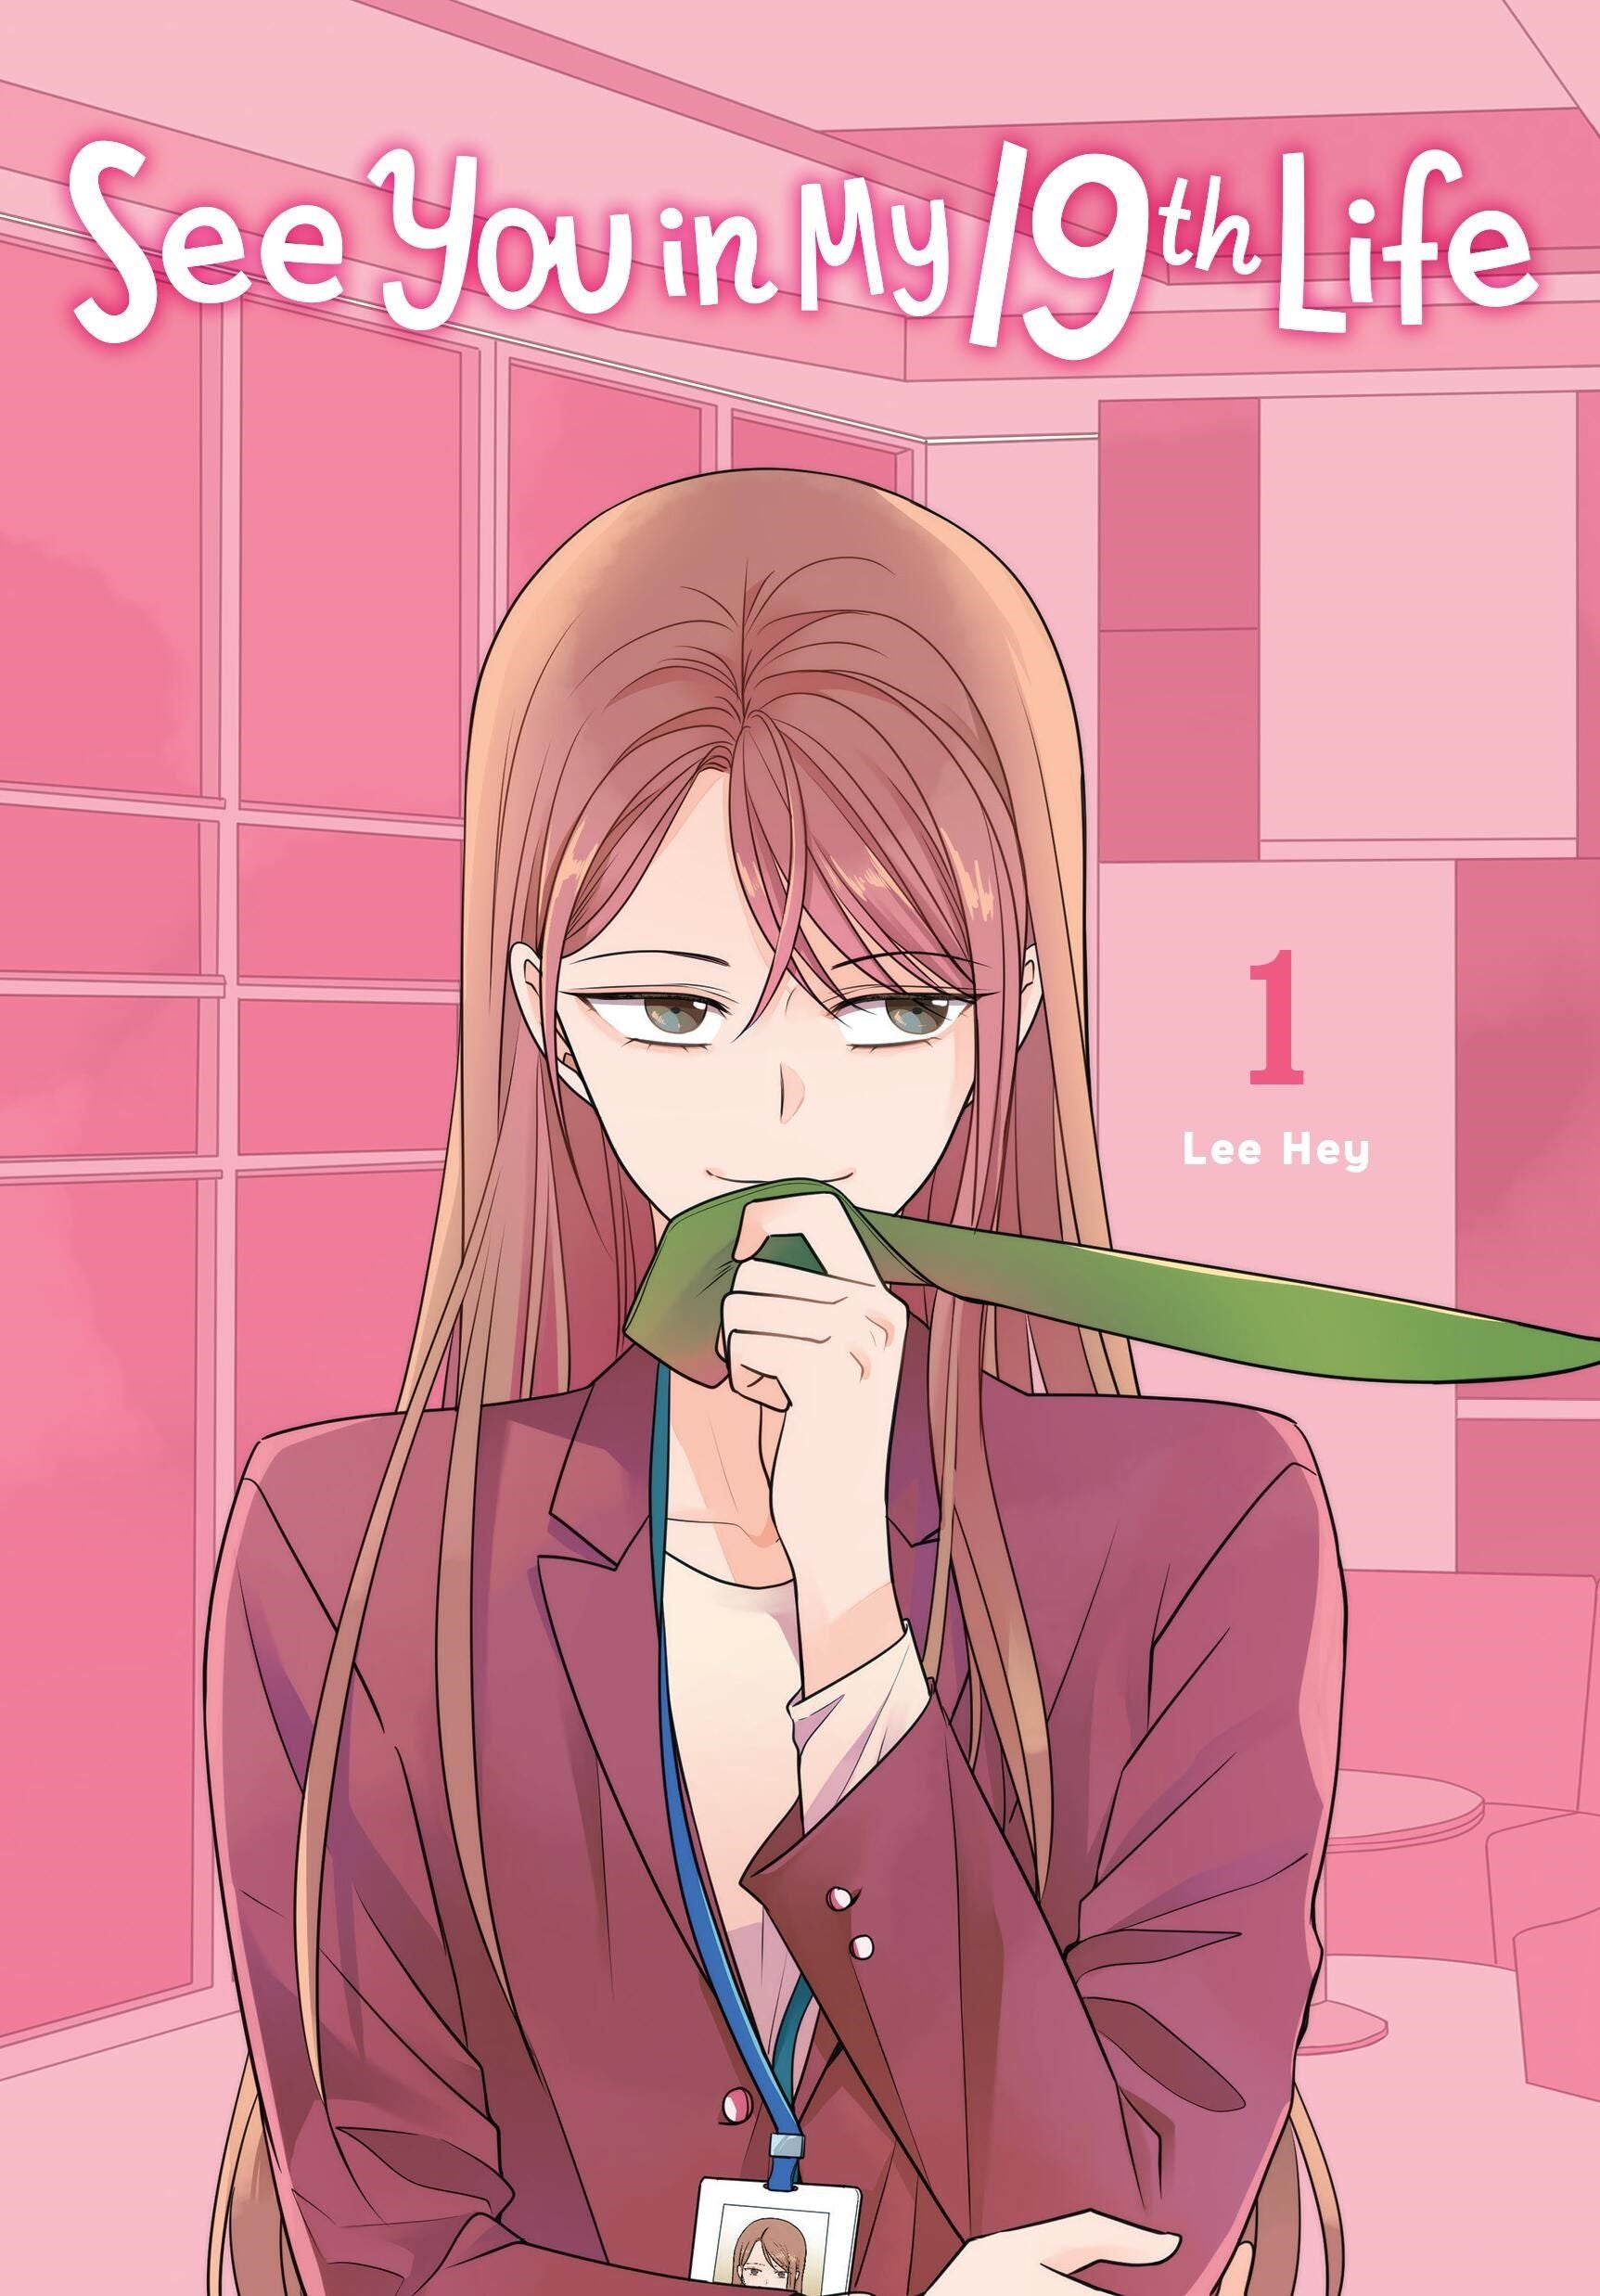 See You in My 19th Life (Manhwa) Vol. 1